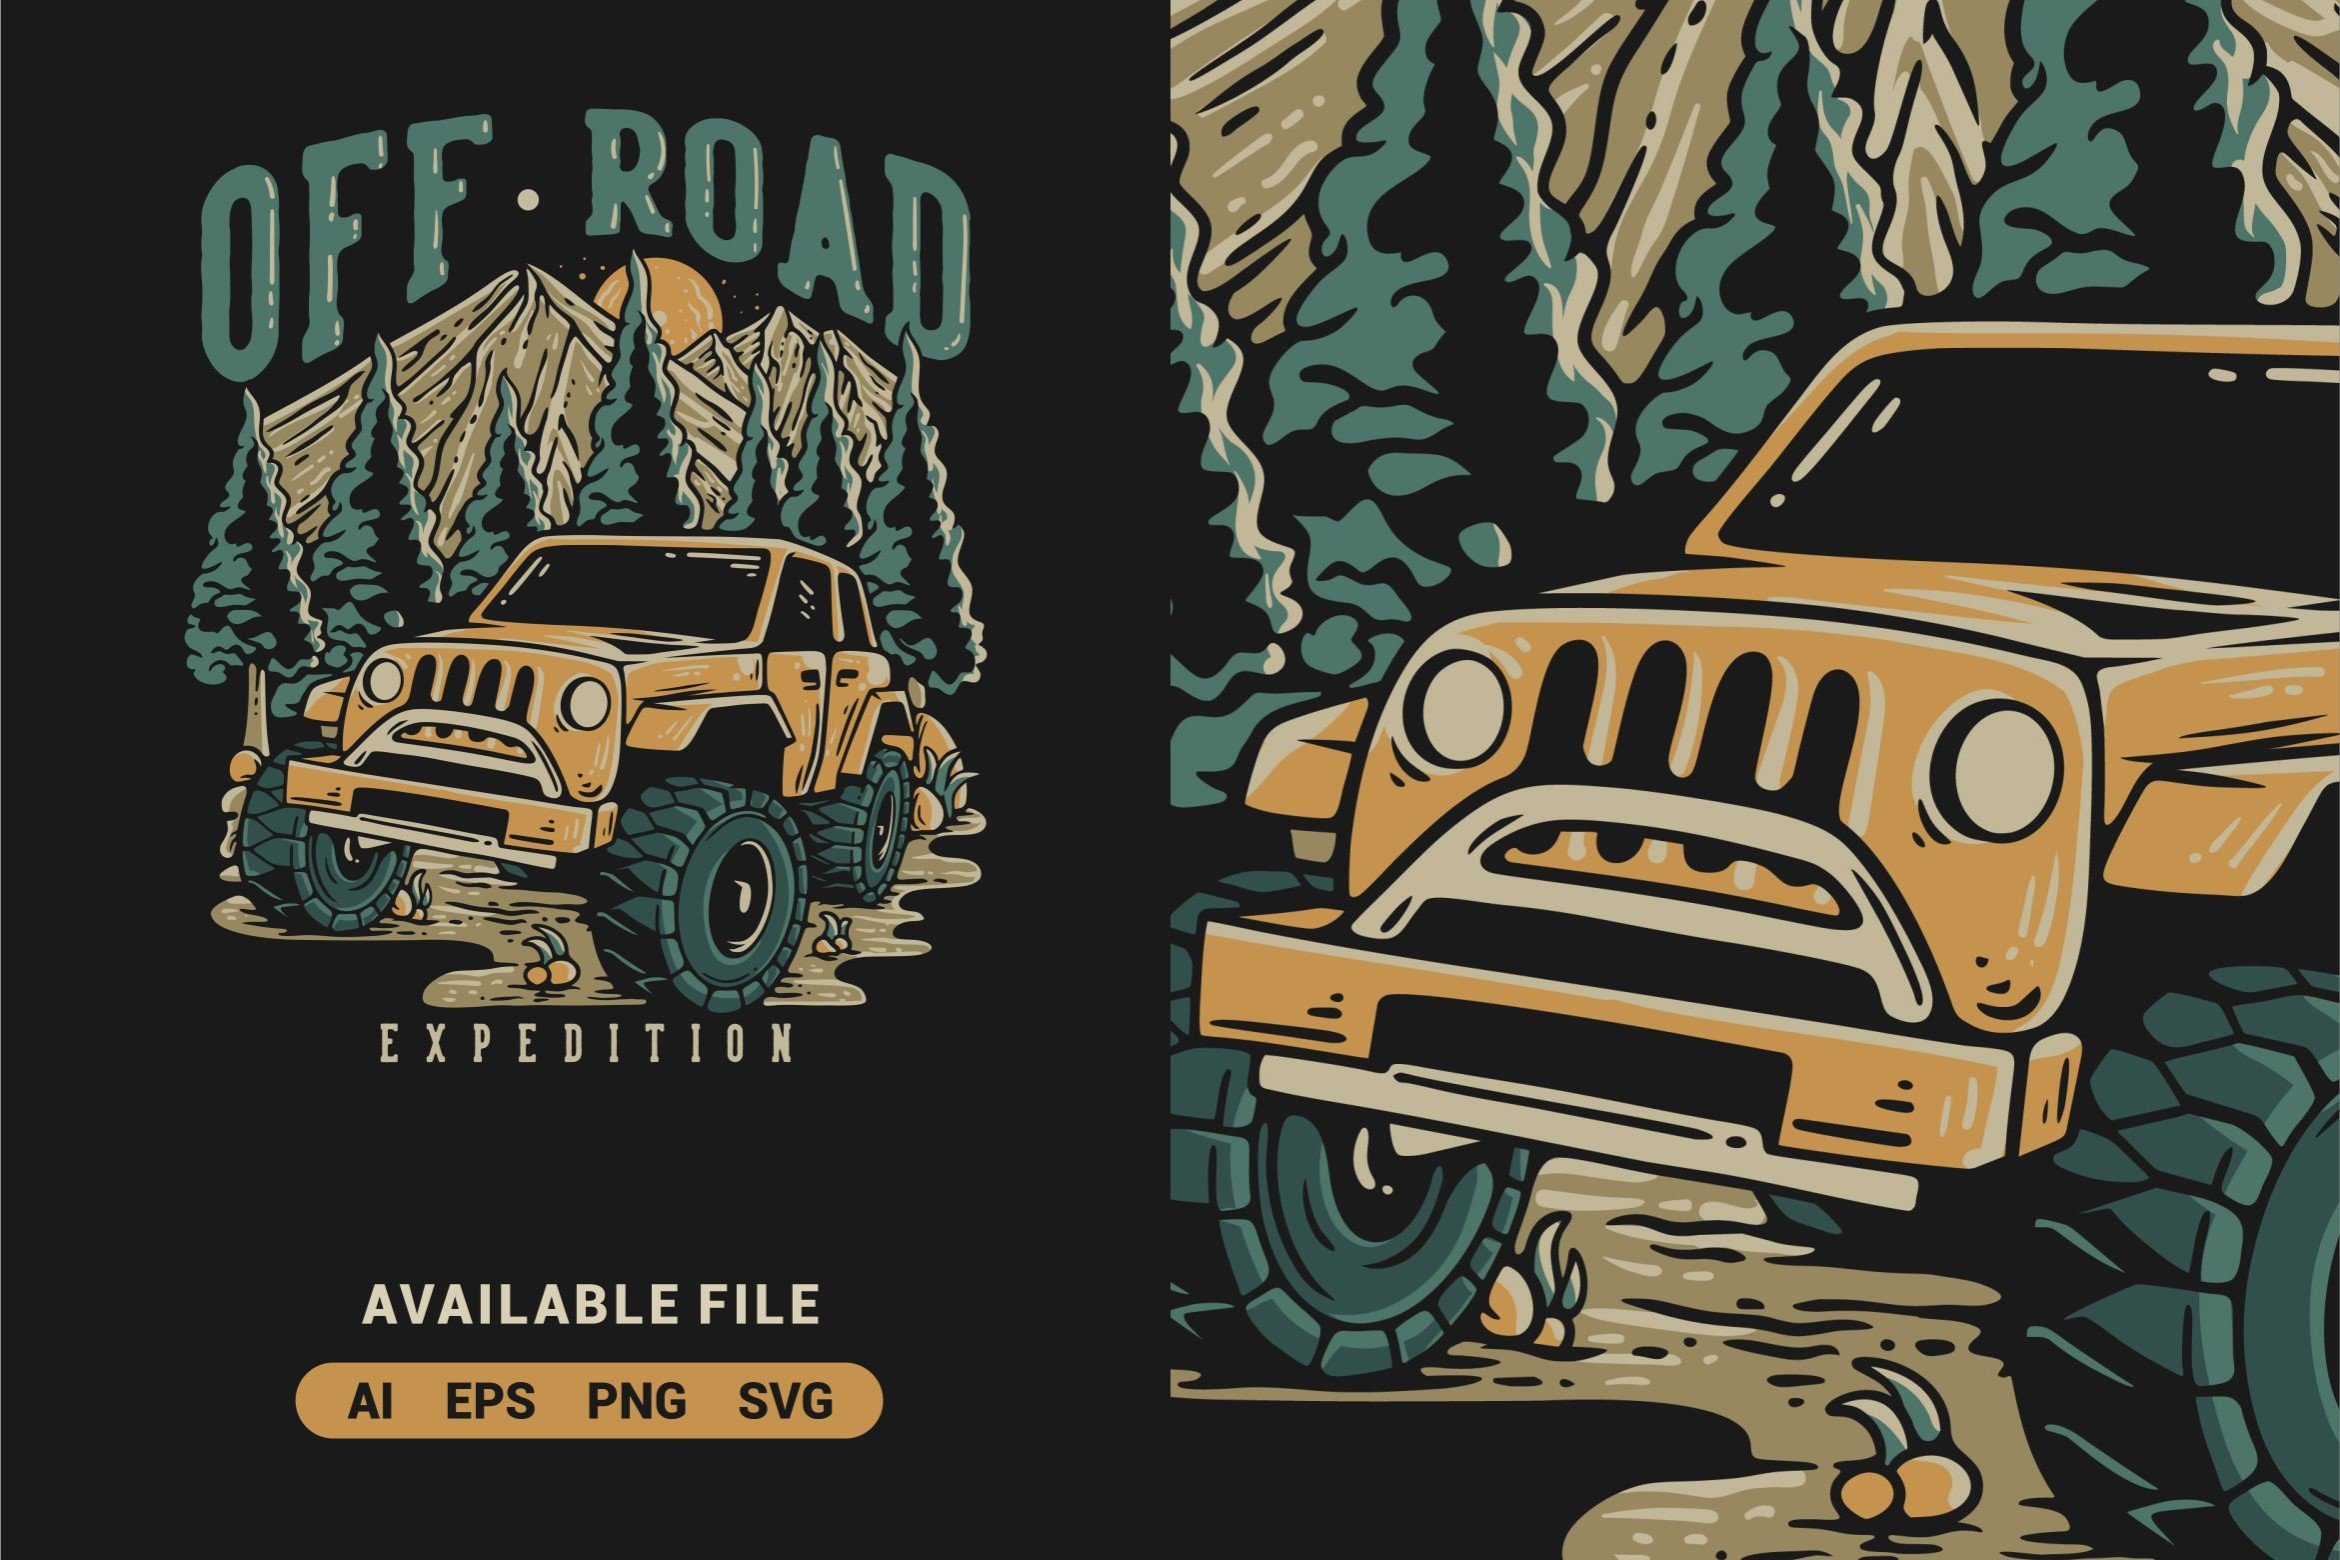 Off Road Car Vector Illustration cover image.